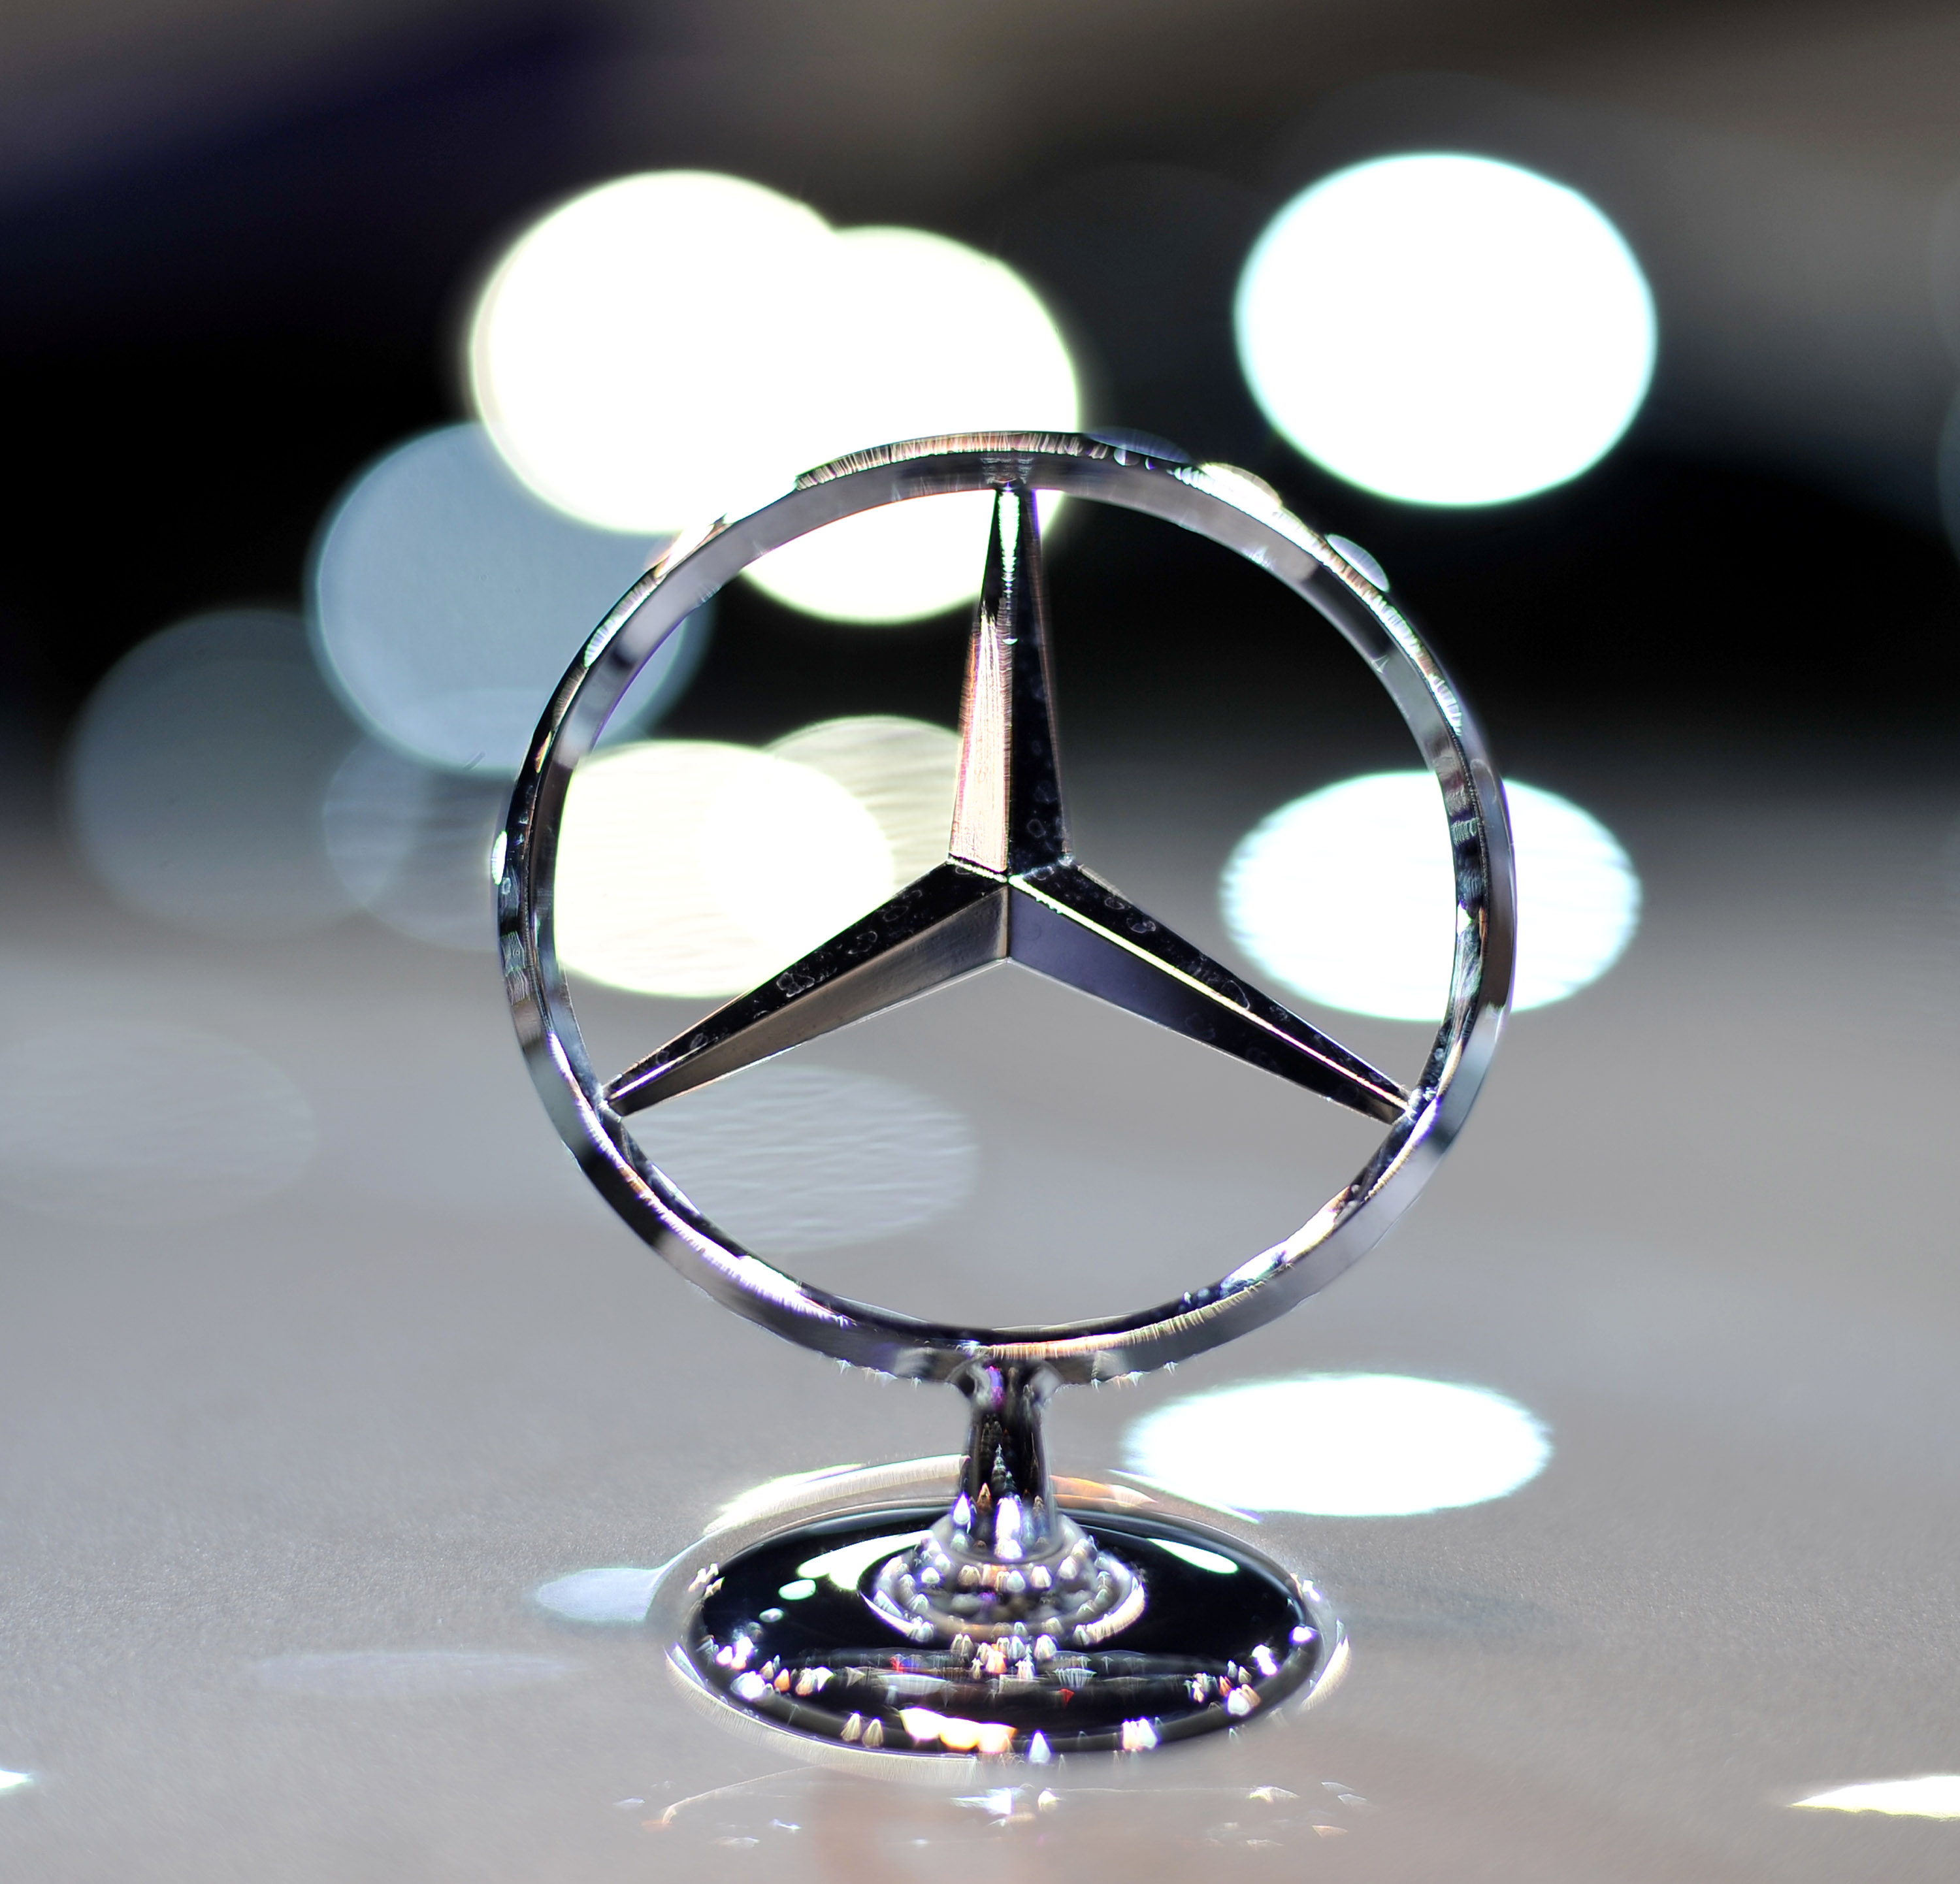 History of the Mercedes-Benz Logo